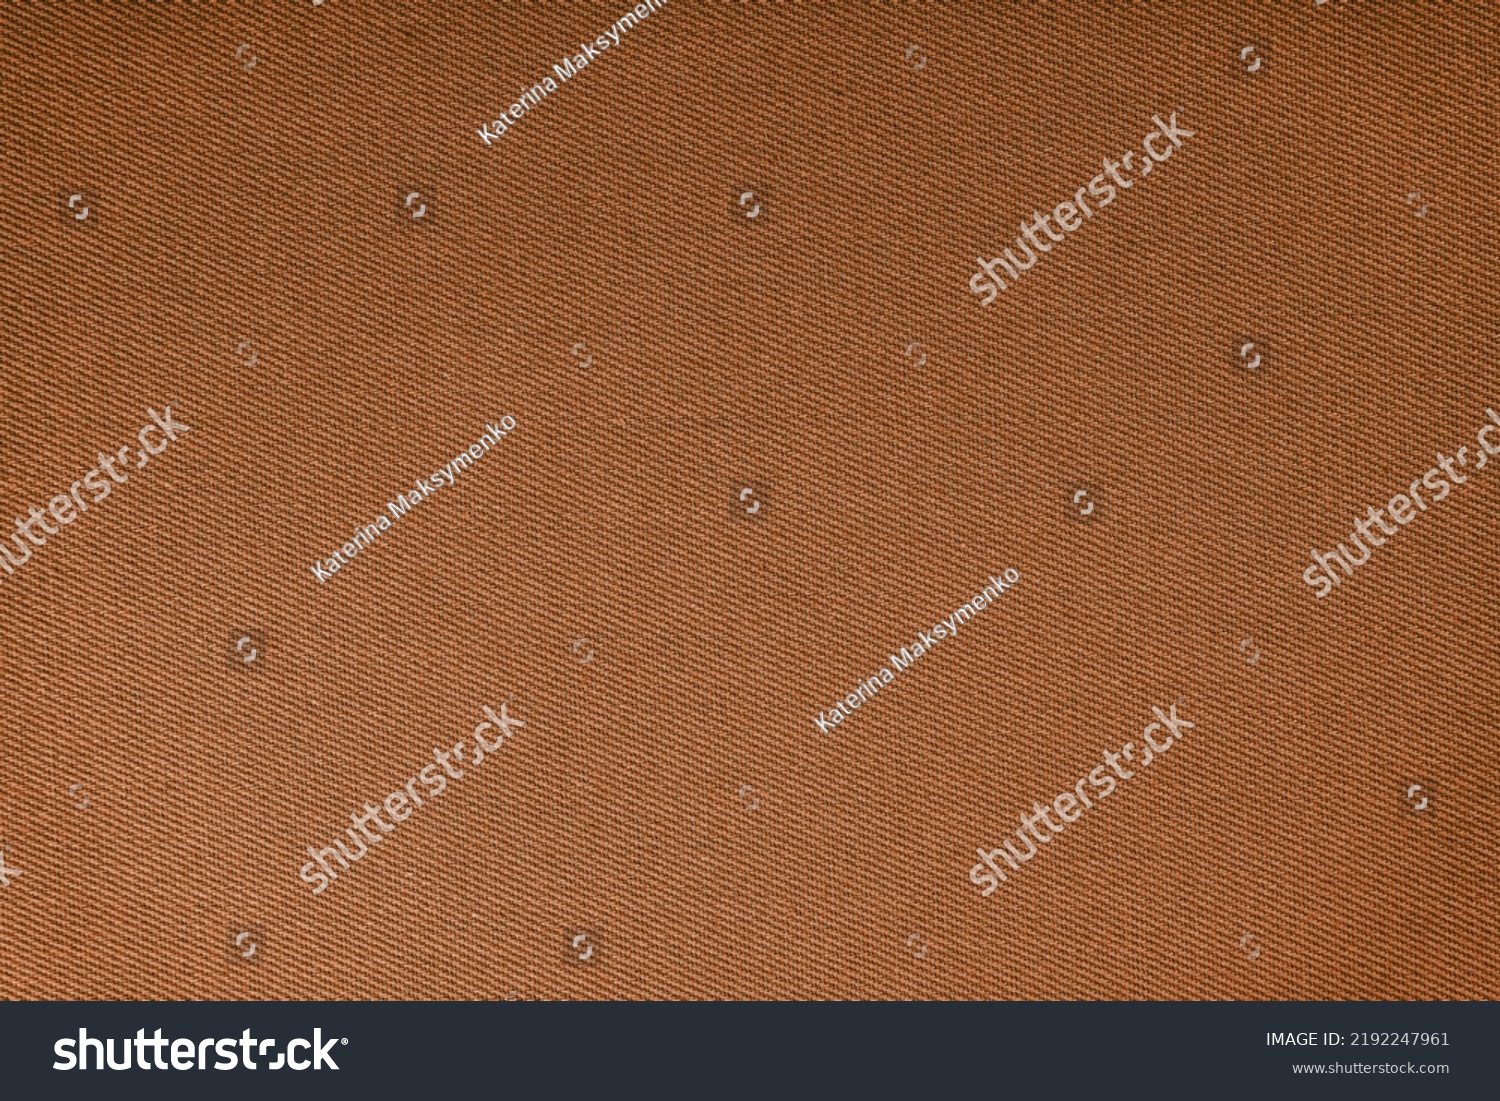 Texture of natural brown fabric or cloth. Fabric texture diagonal weave of natural cotton or linen textile material. Blue canvas background. Decorative fabric for curtain, furniture, walls, clothes #2192247961